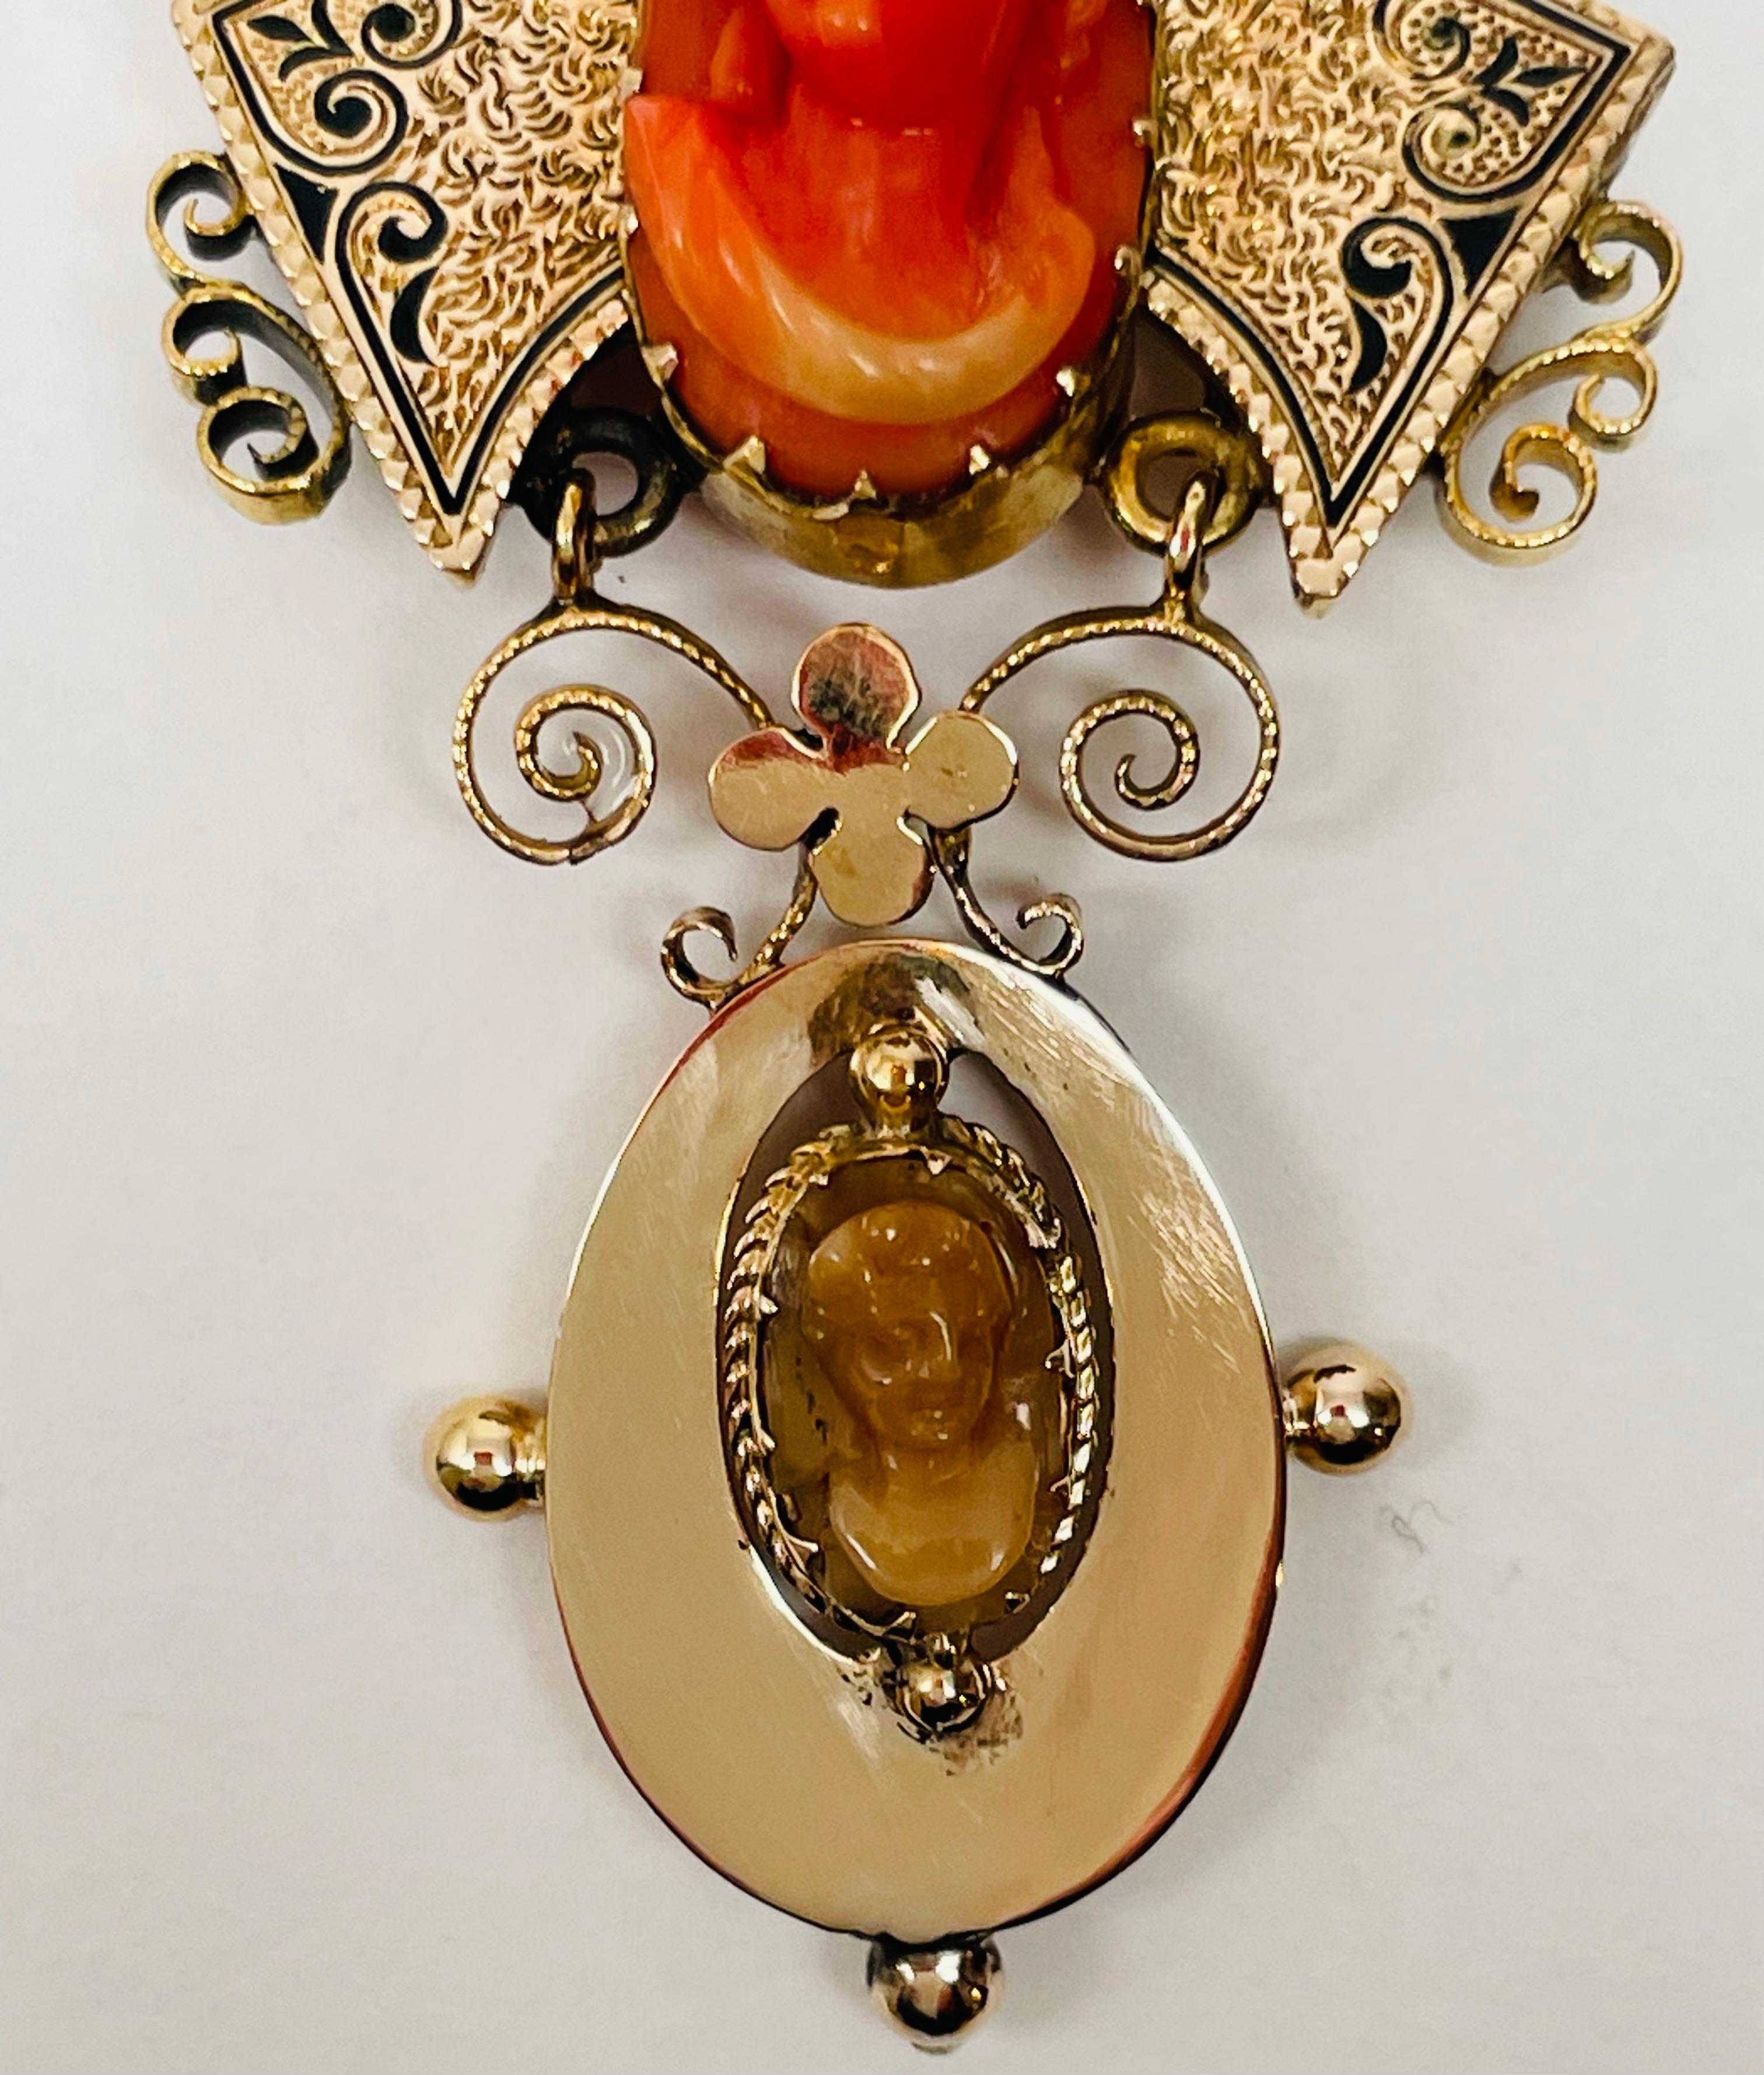 Very unusual Victorian 14kt. Gold Brooch with 2 cameos. The upper portion has taille d’epargné, engraving filled in with black enamel. The cameo on the upper piece is a high relief woman's face carved from Coral. The smaller cameo on the hinged